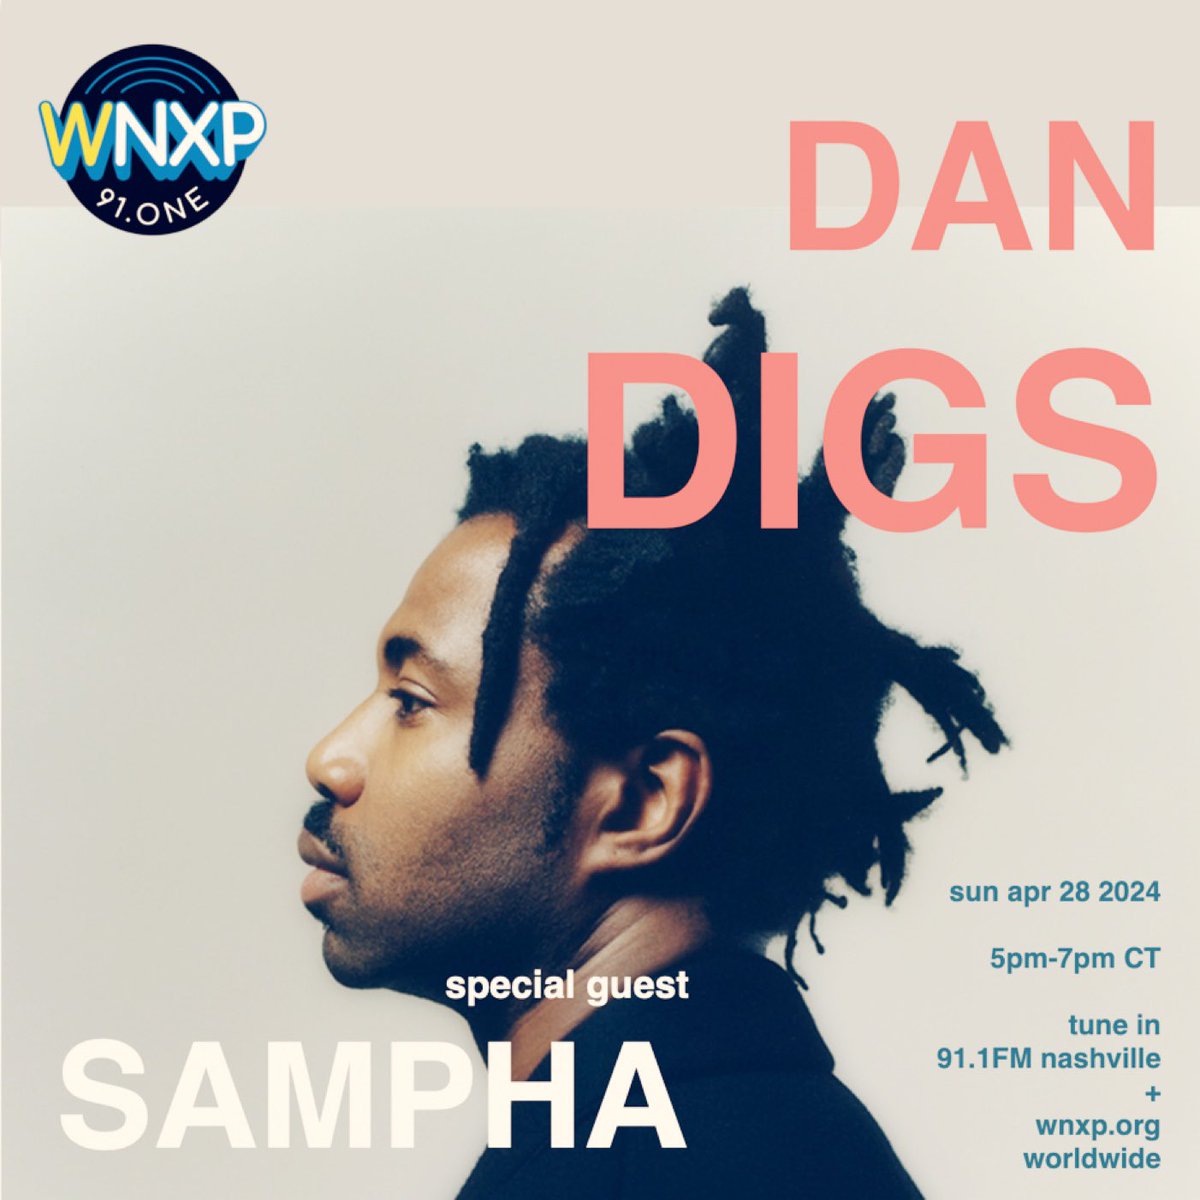 New radio show! Catch me 5p-7p on Sundays @wnxpnashville @nprmusic for a weekly curated blend of new electronic soul, leftfield indie, experimental beats + global sounds Special guest for episode 1 tonight: @sampha Tune in 91.1FM Nashville + wnxp.org